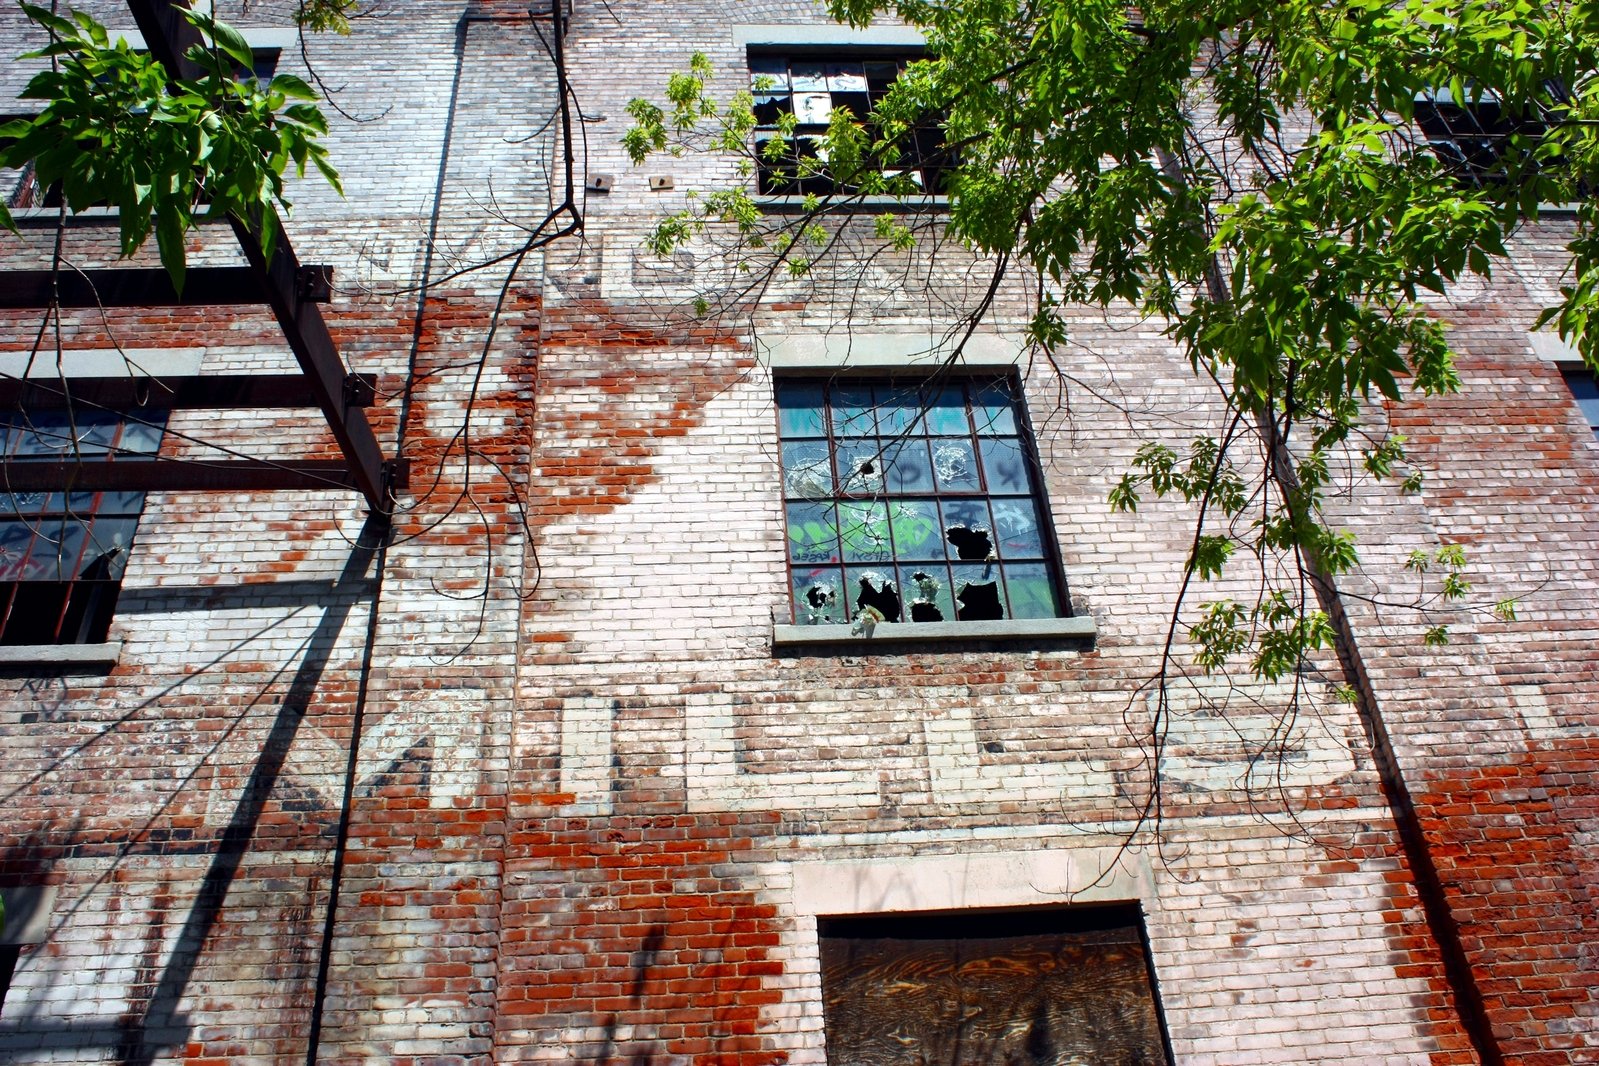 a view of a building with windows in the front